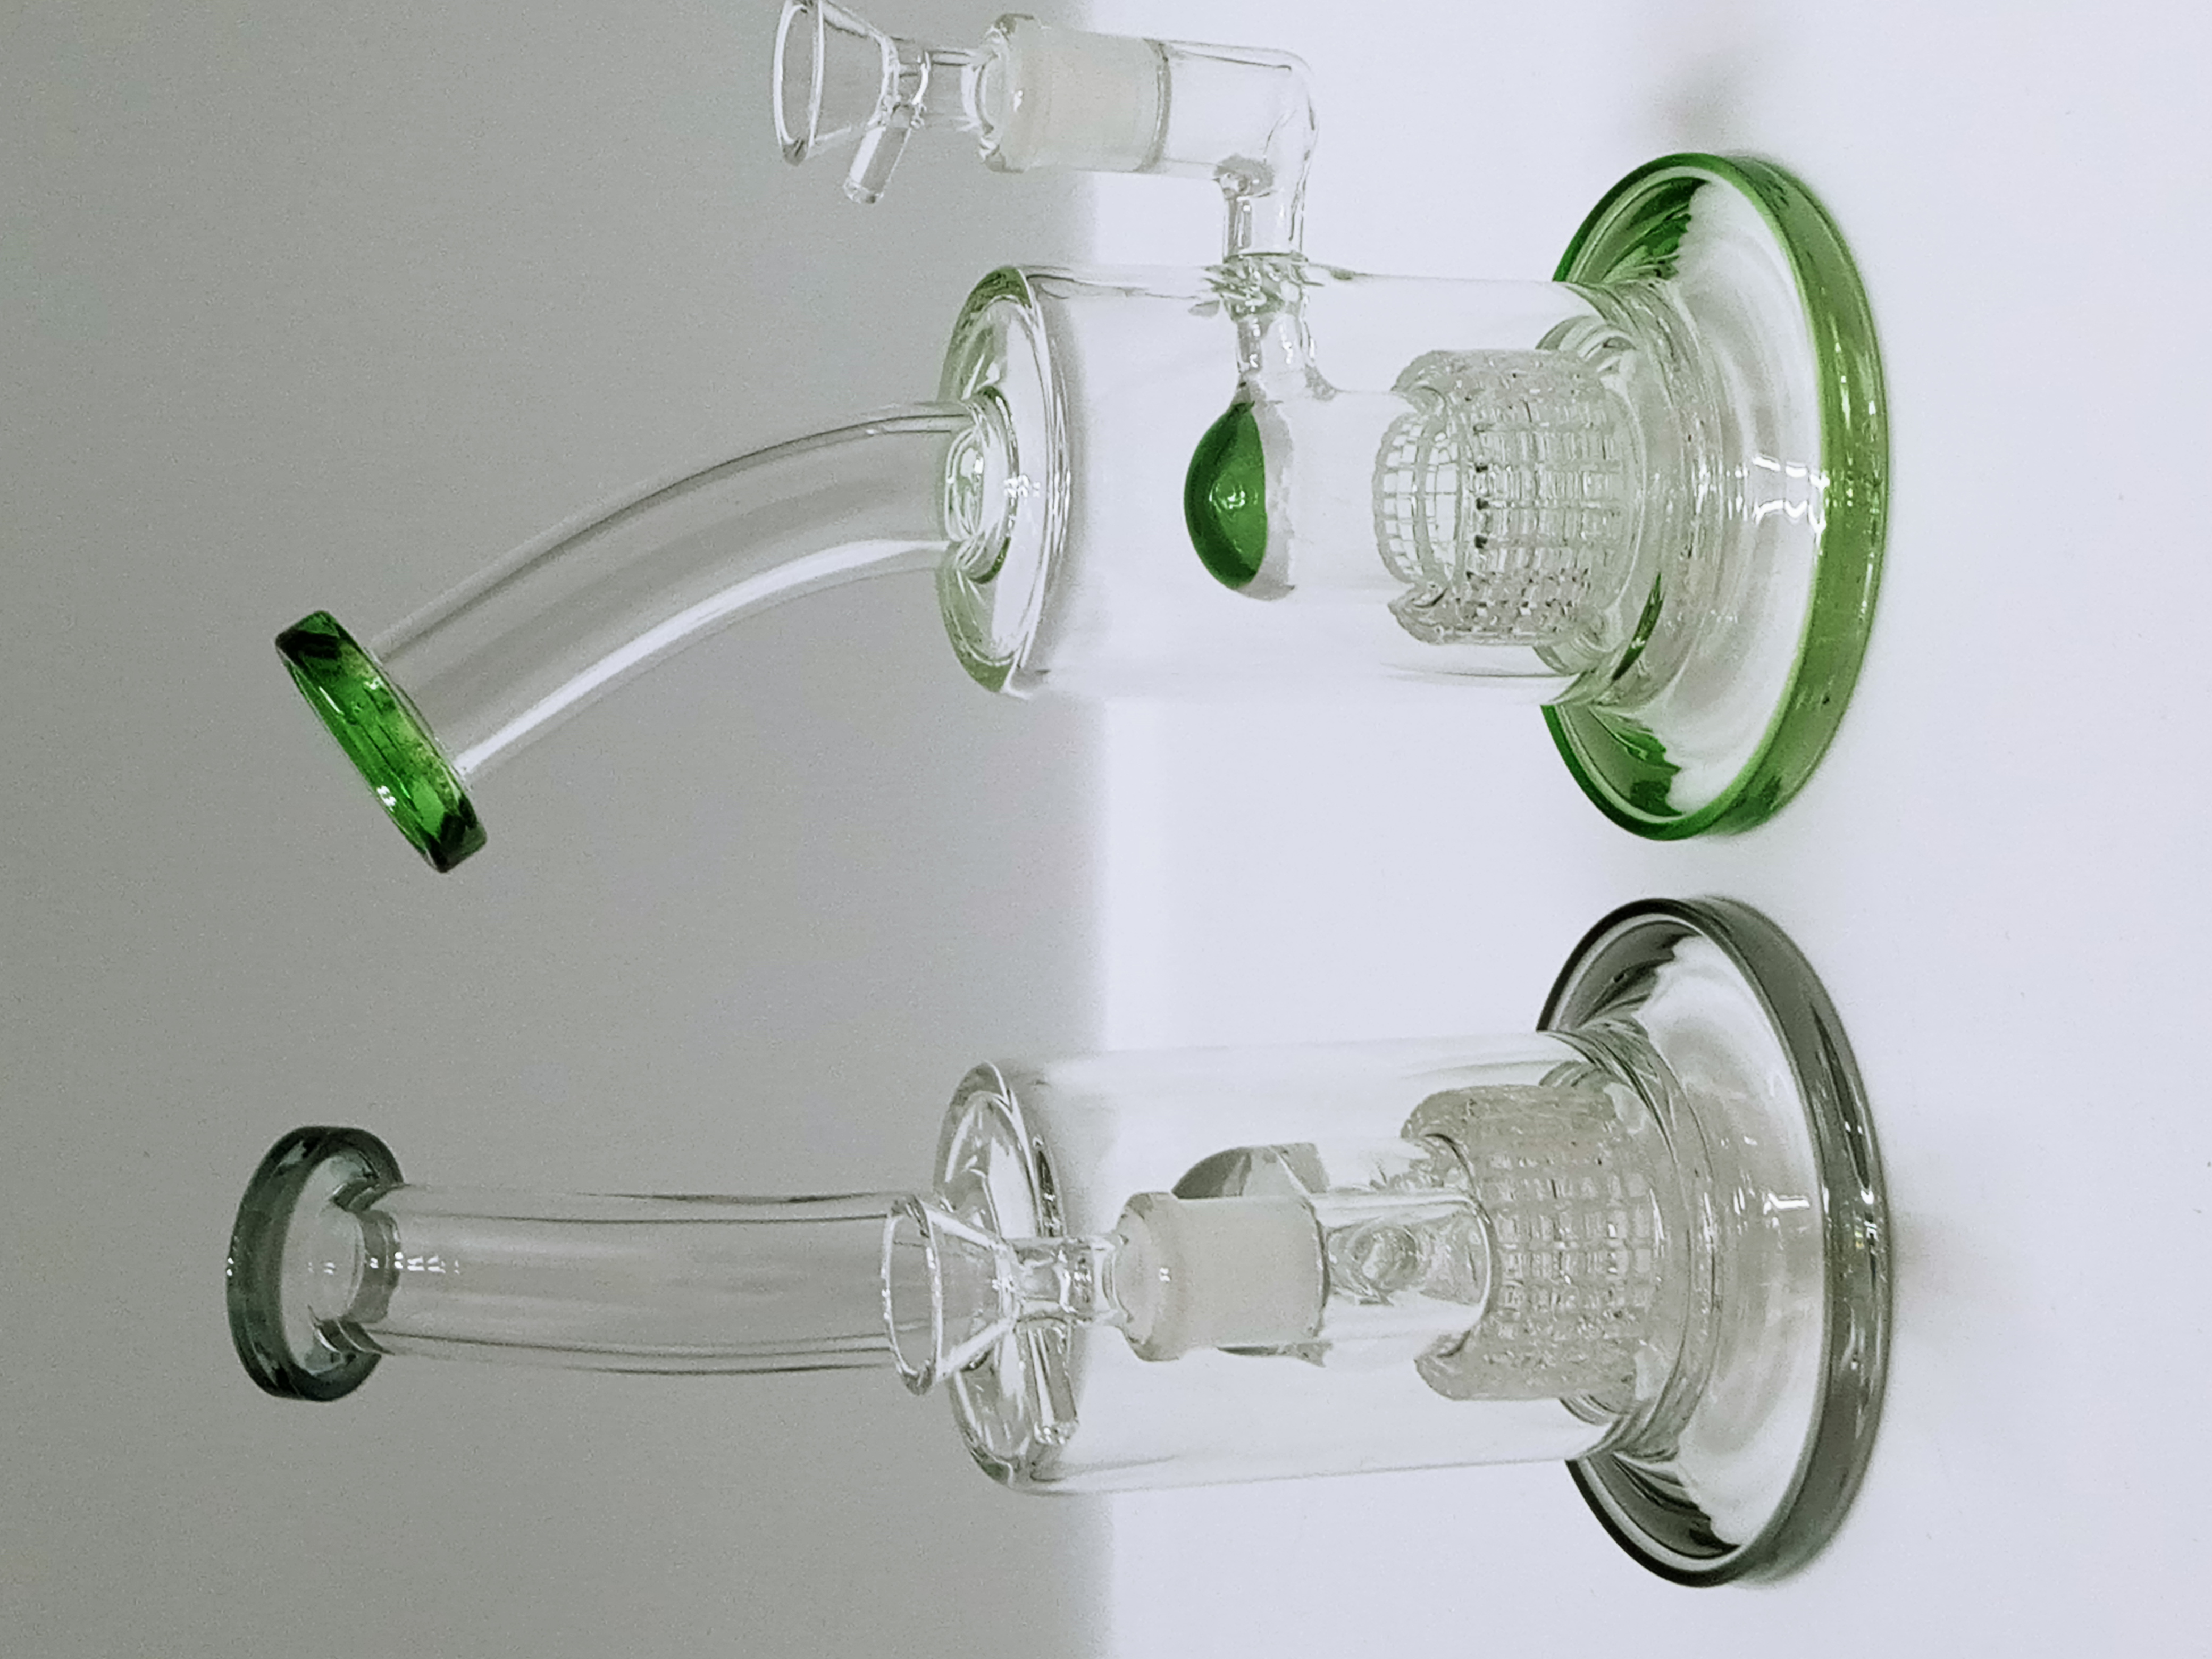 World's Best Online Smoke Shop  Pipes, Dab Rigs, Synthetic Urine, Detox